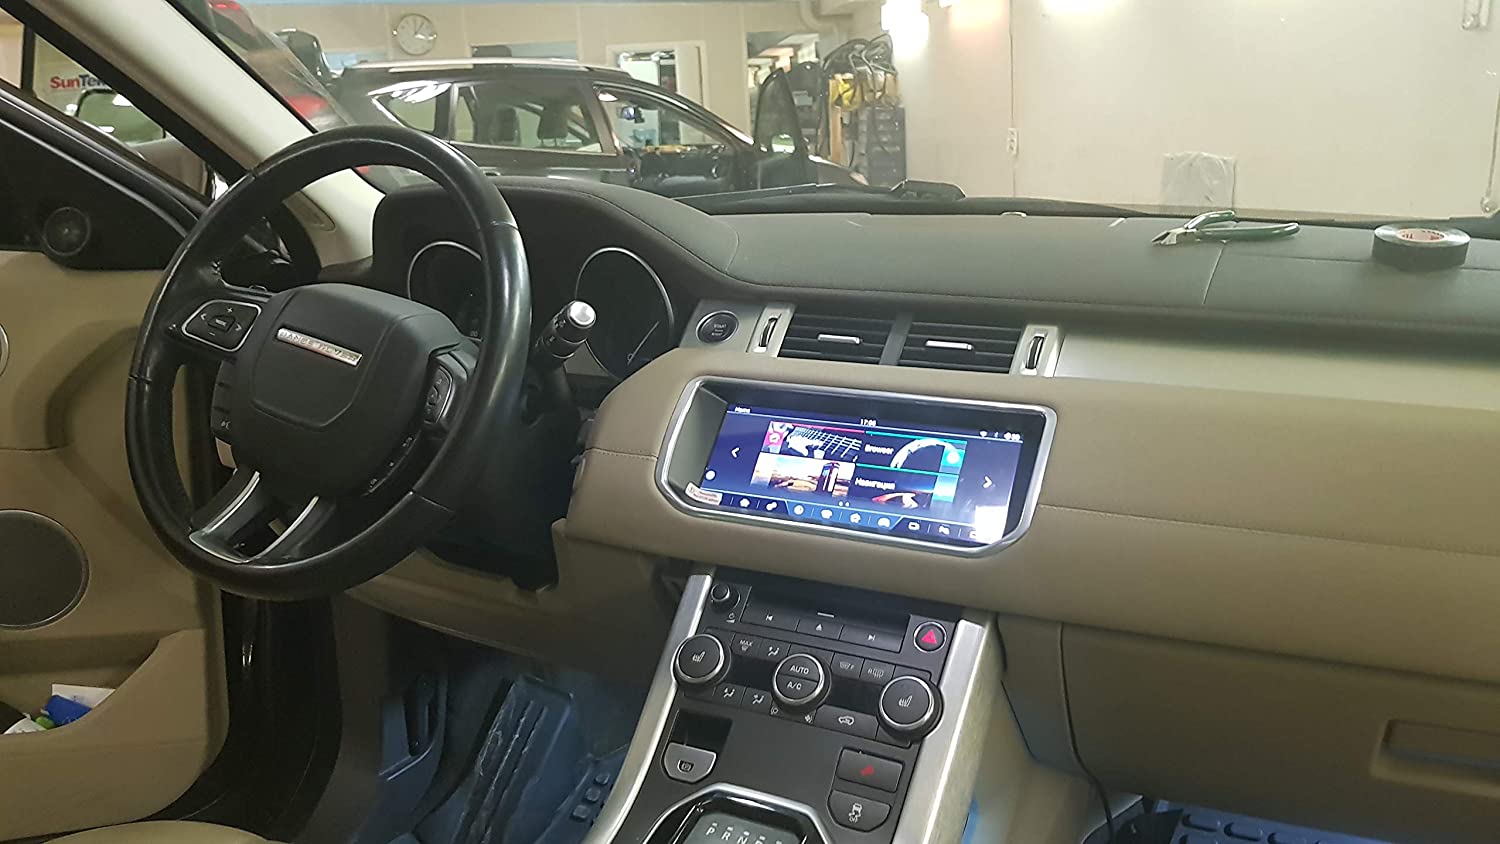 10.25" Land Rover Range Rover Evoque (L538) Android Multimedia Touchscreen Display + Built-in Wireless CarPlay & Android Auto